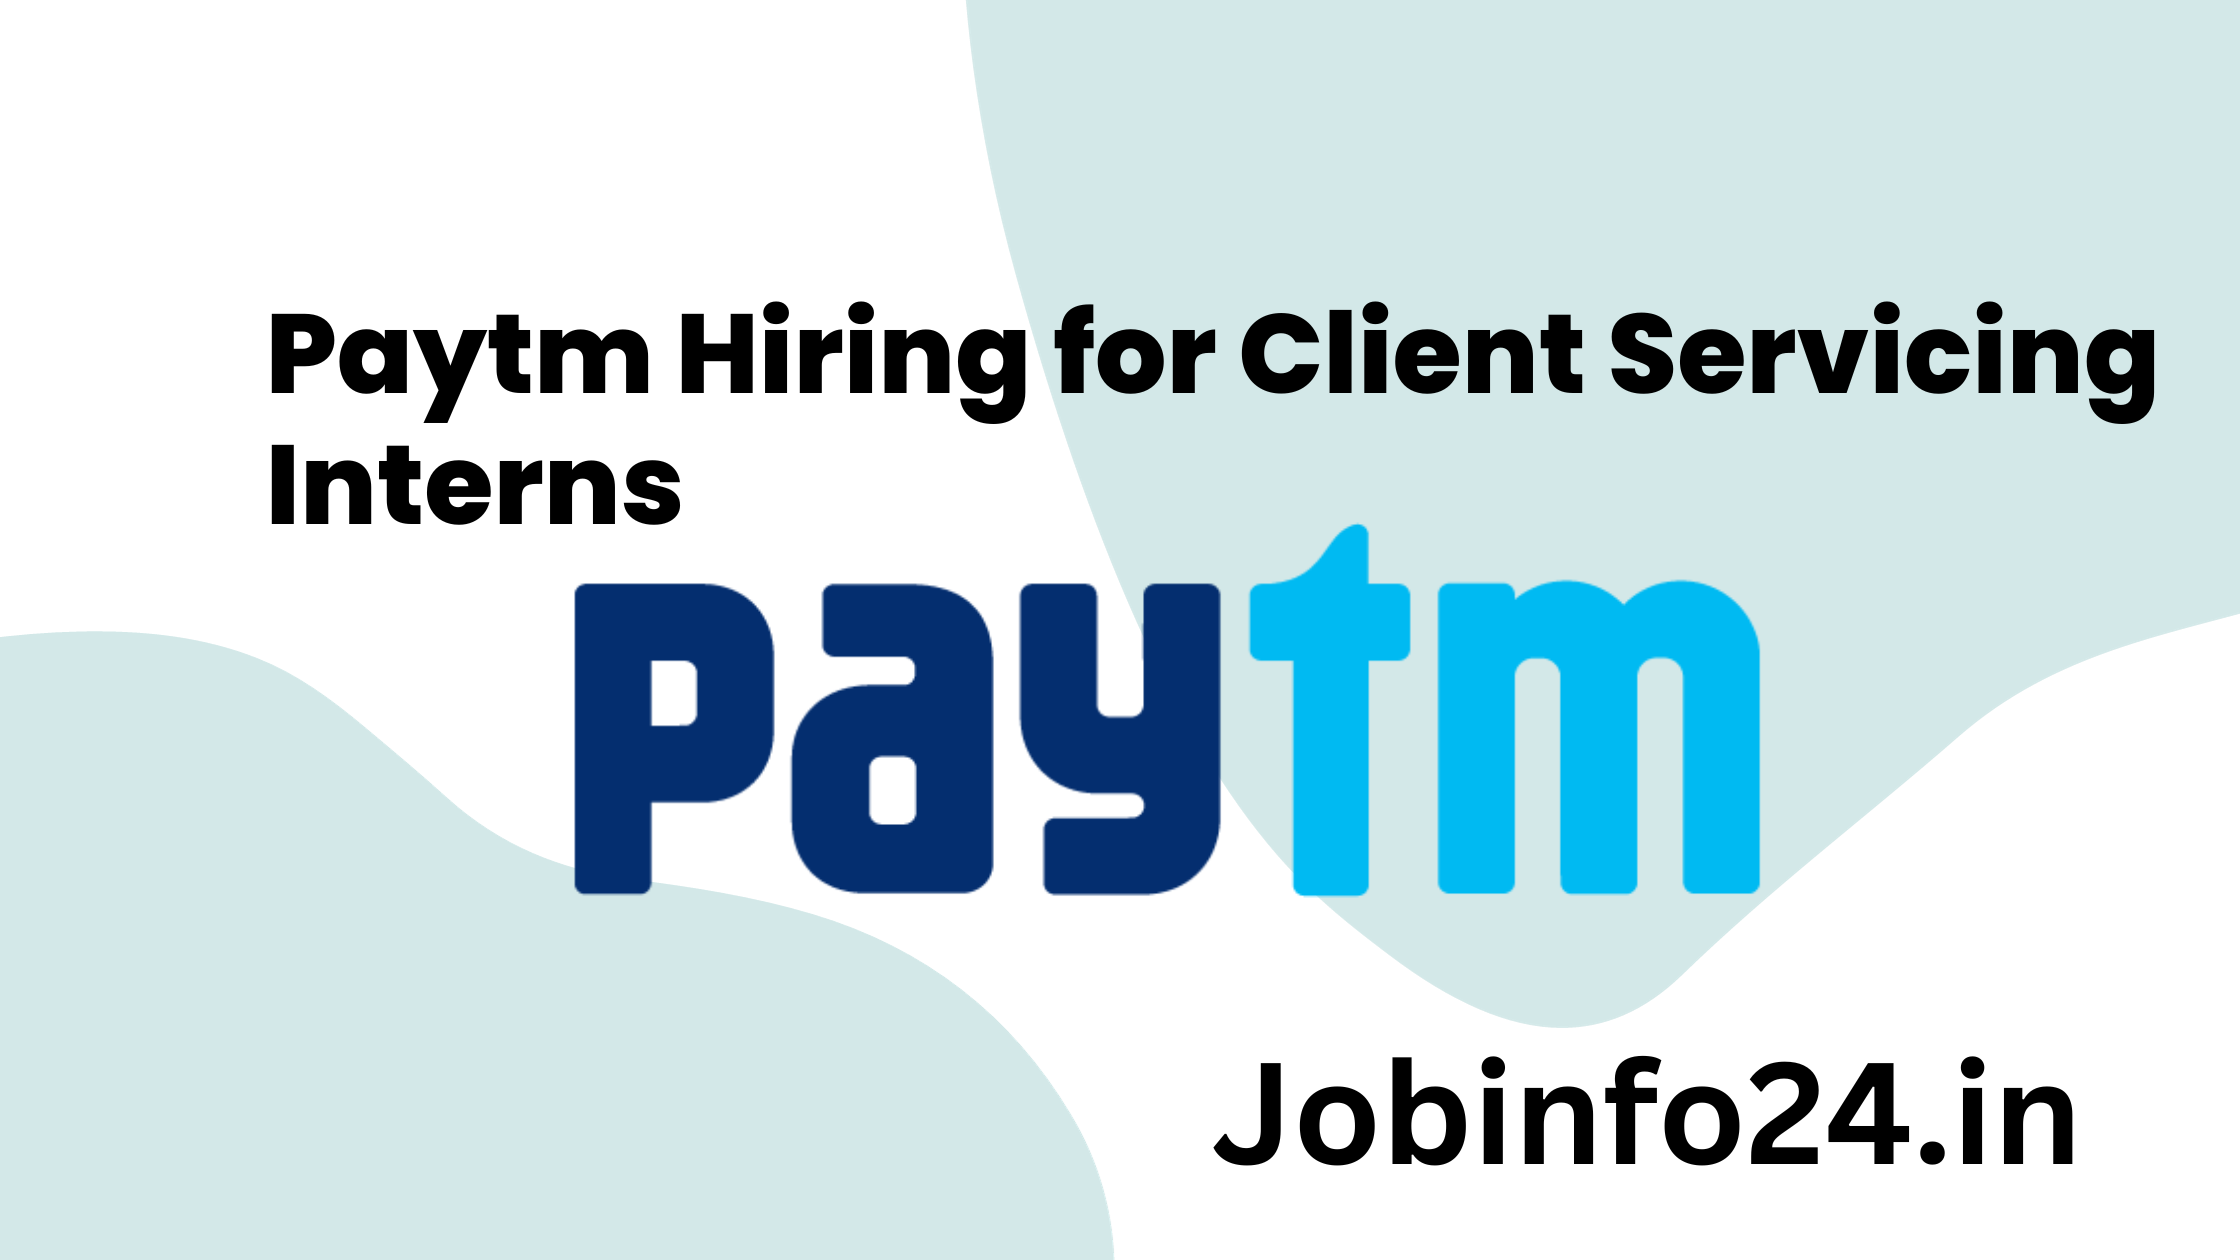 Paytm Hiring for Client Servicing Interns